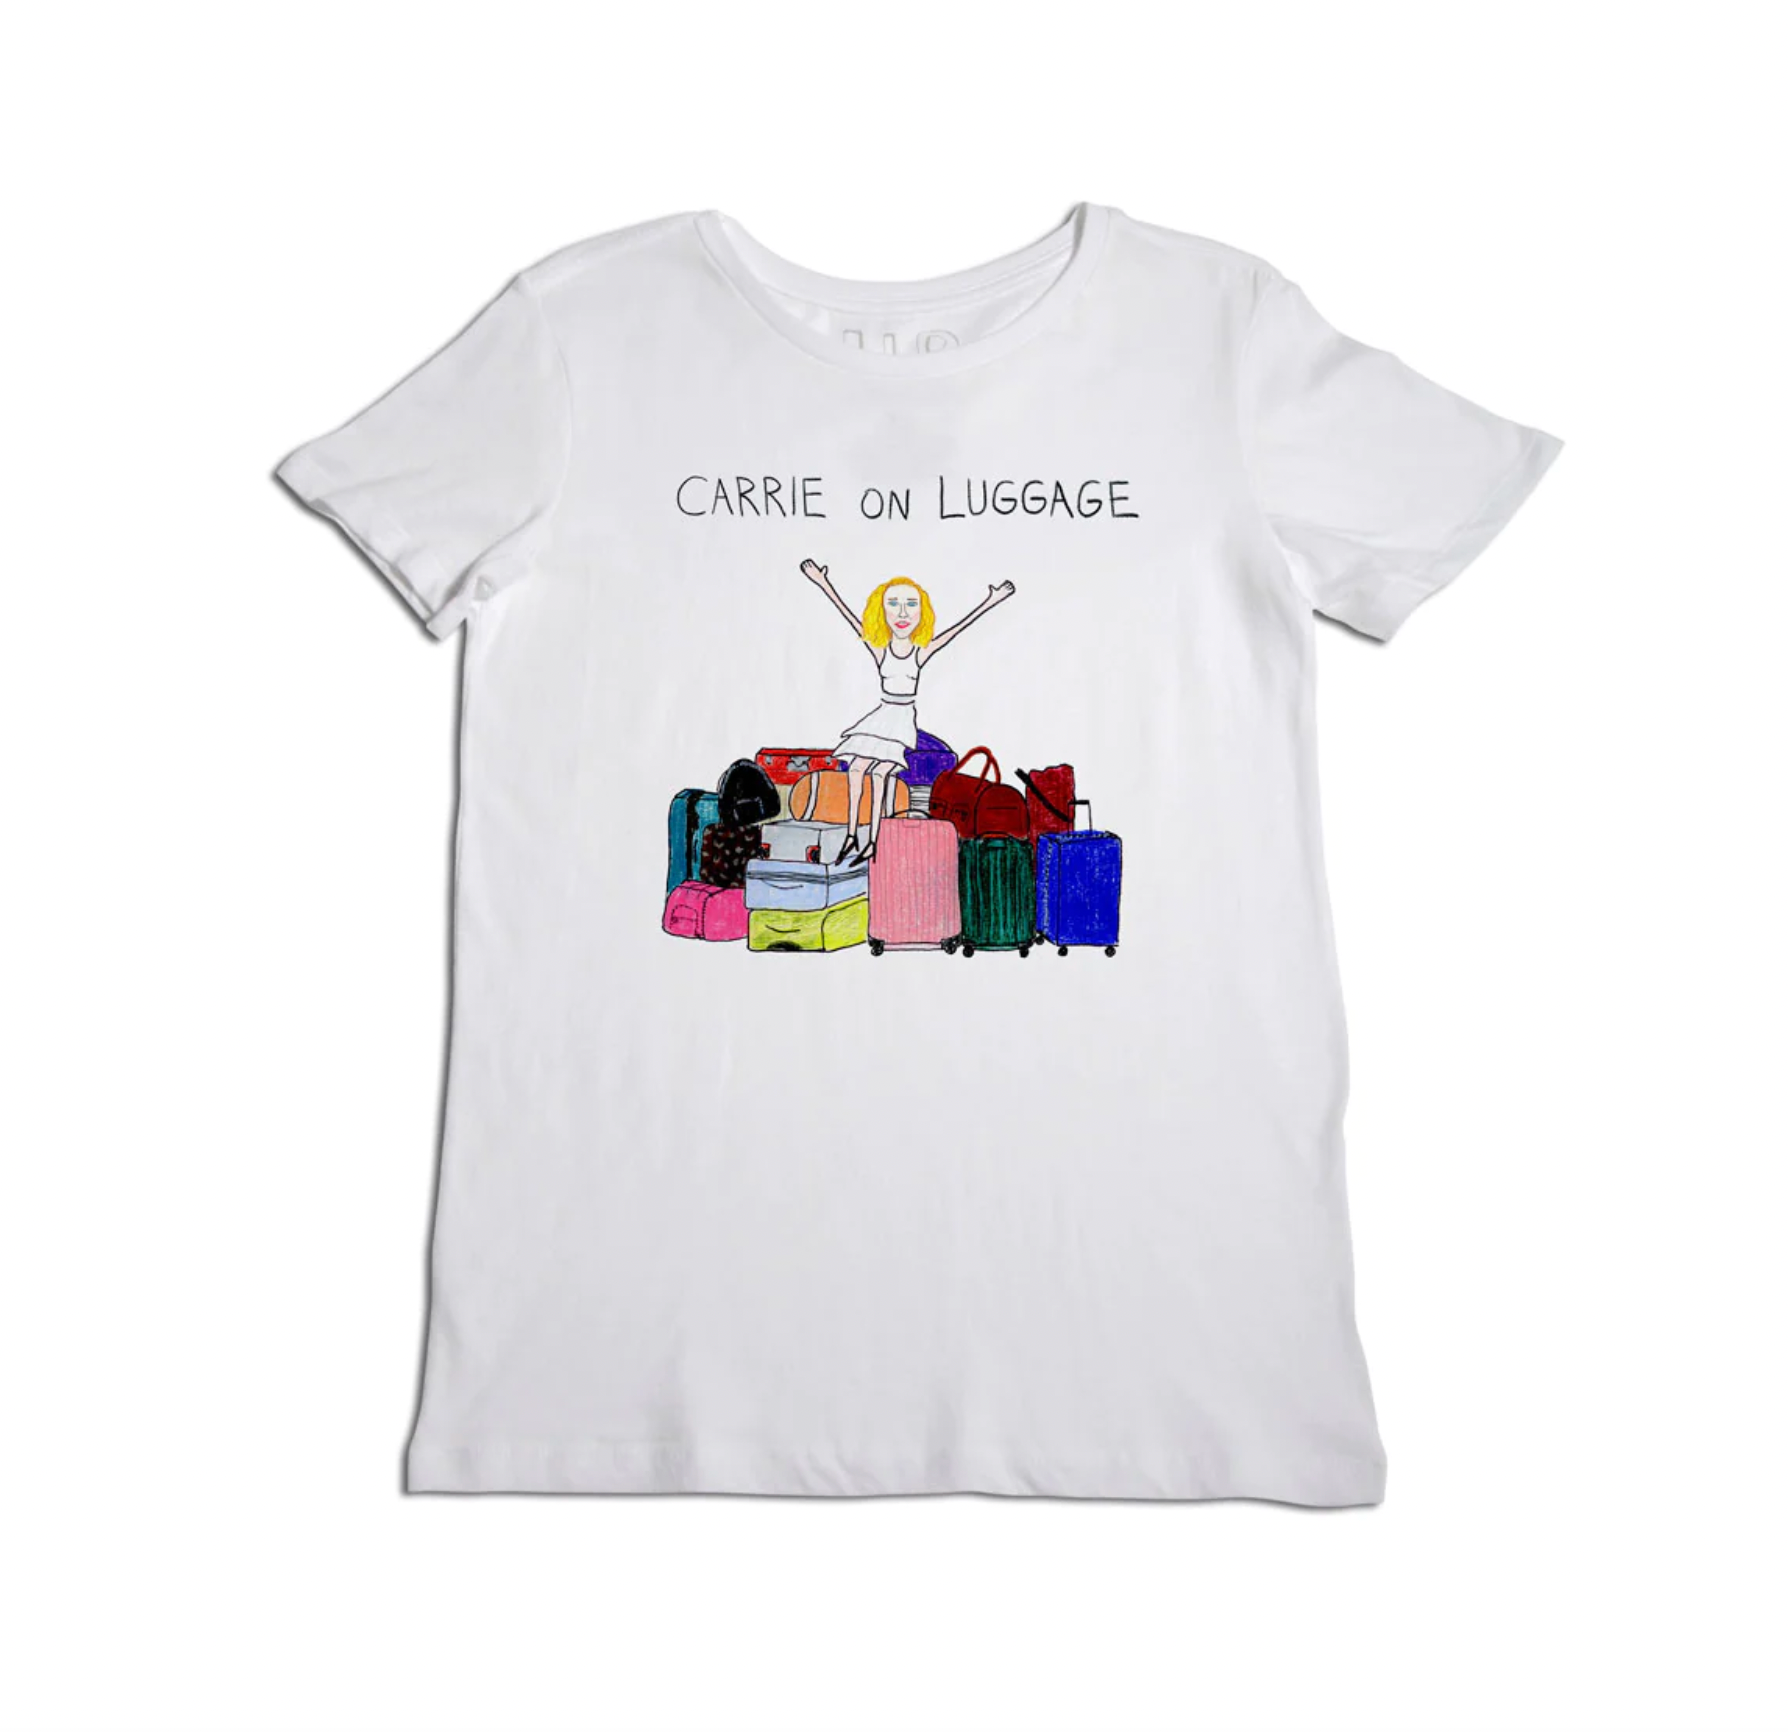 Carrie on Luggage White T-Shirt